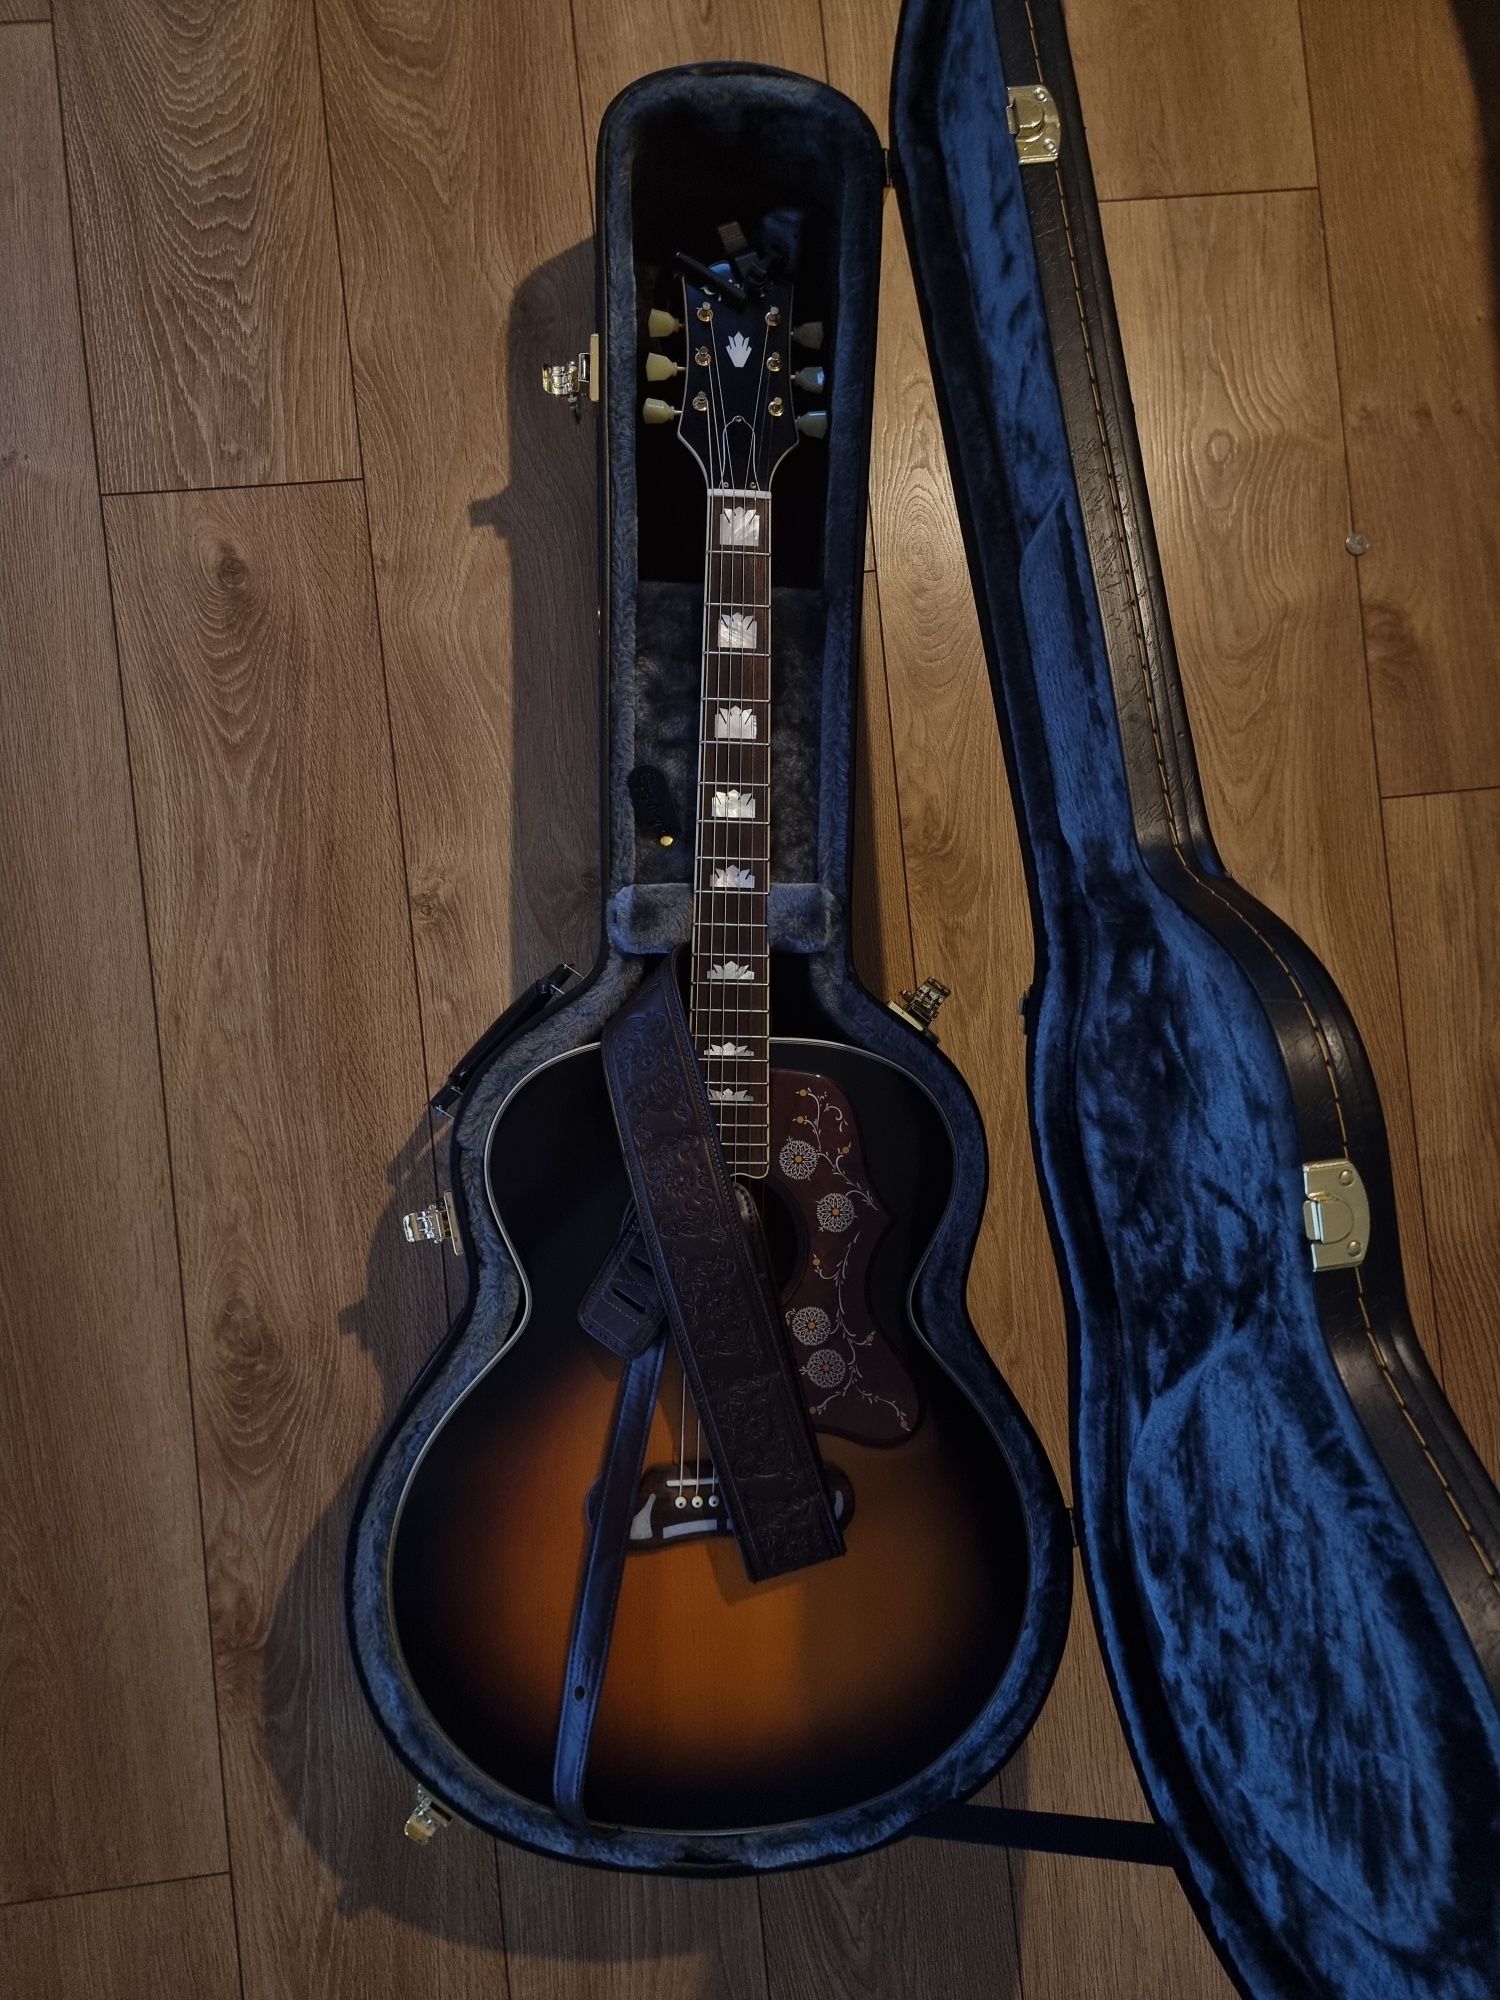 Epiphone J-200 Inspired by Gibson.